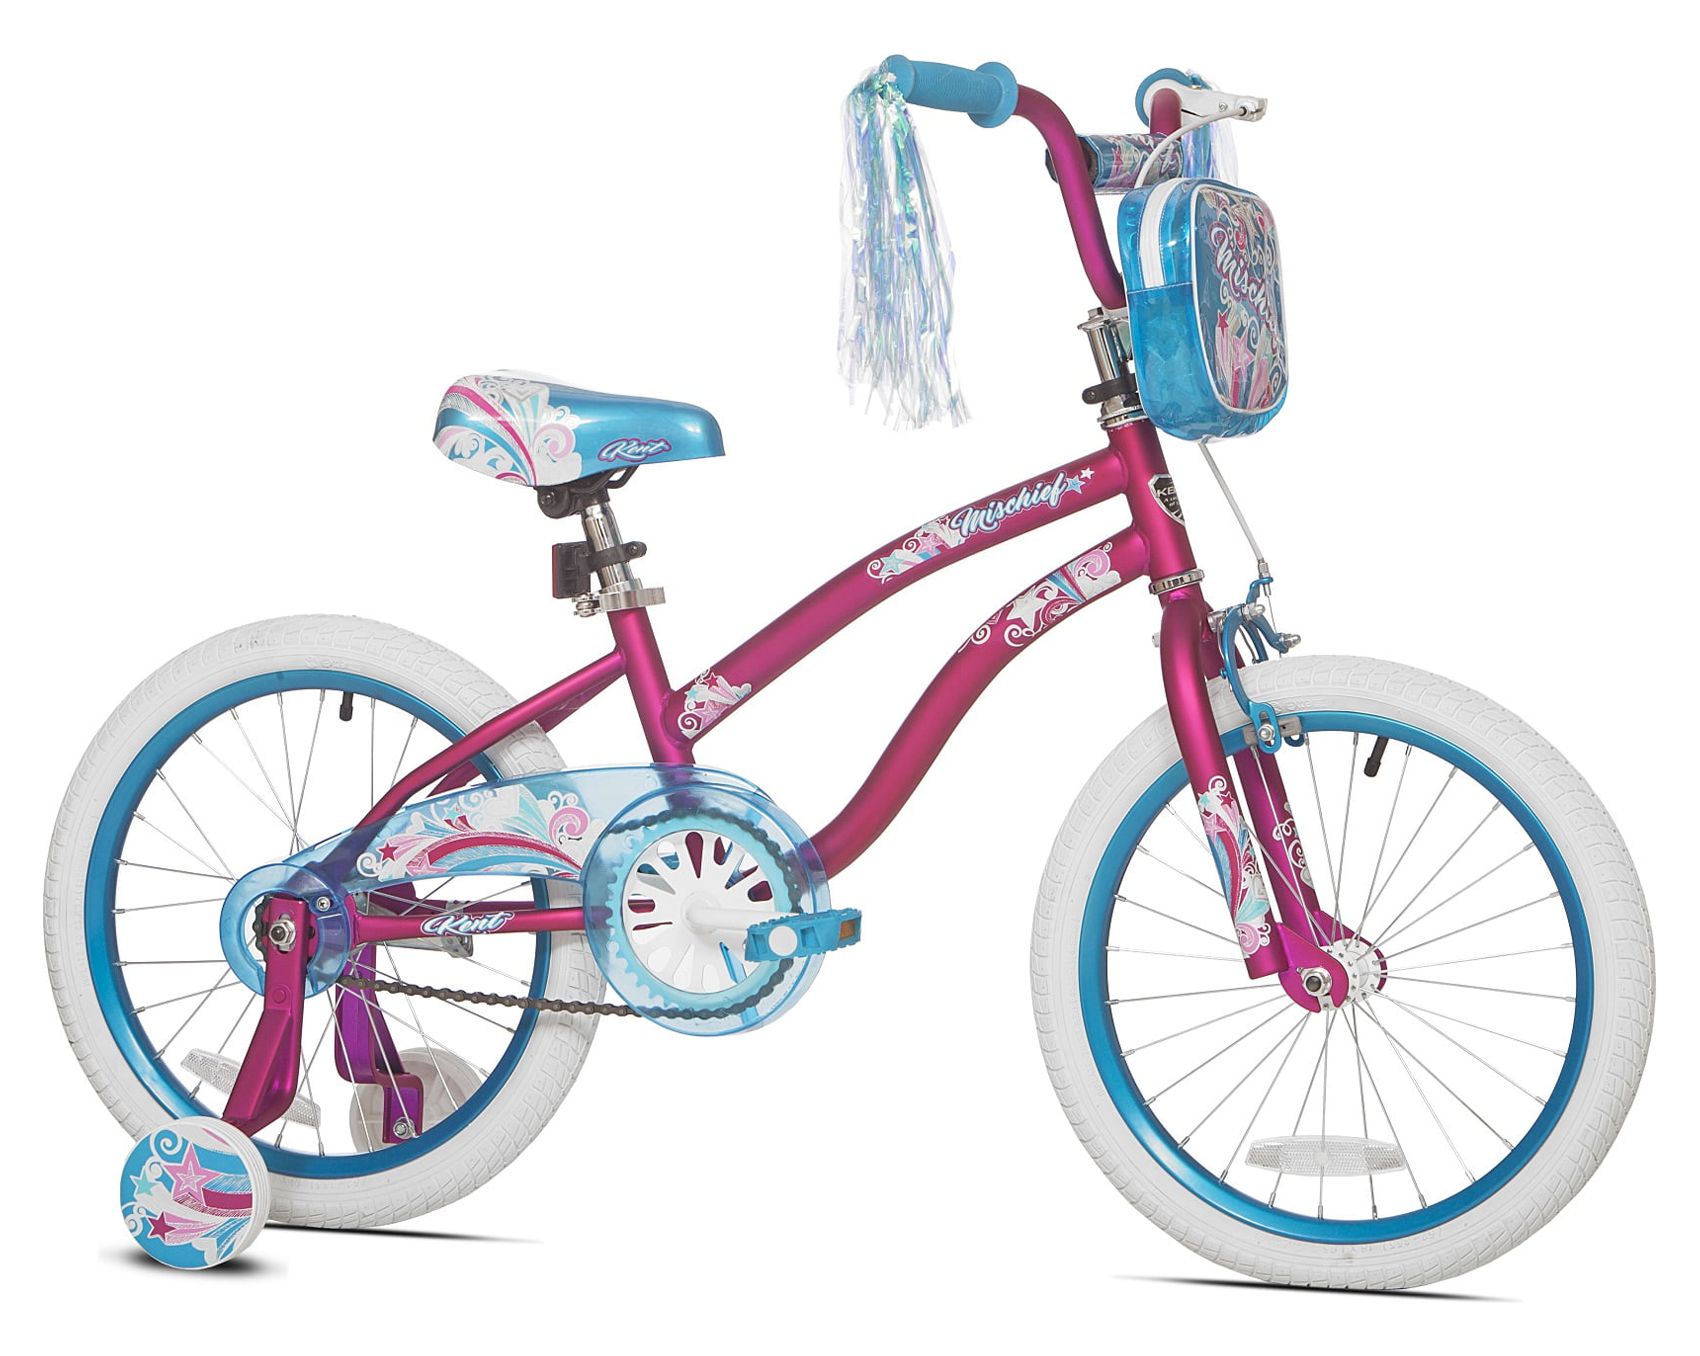 Kent 18 in. Mischief Girl's Child Bike, Pink and Blue - image 1 of 11